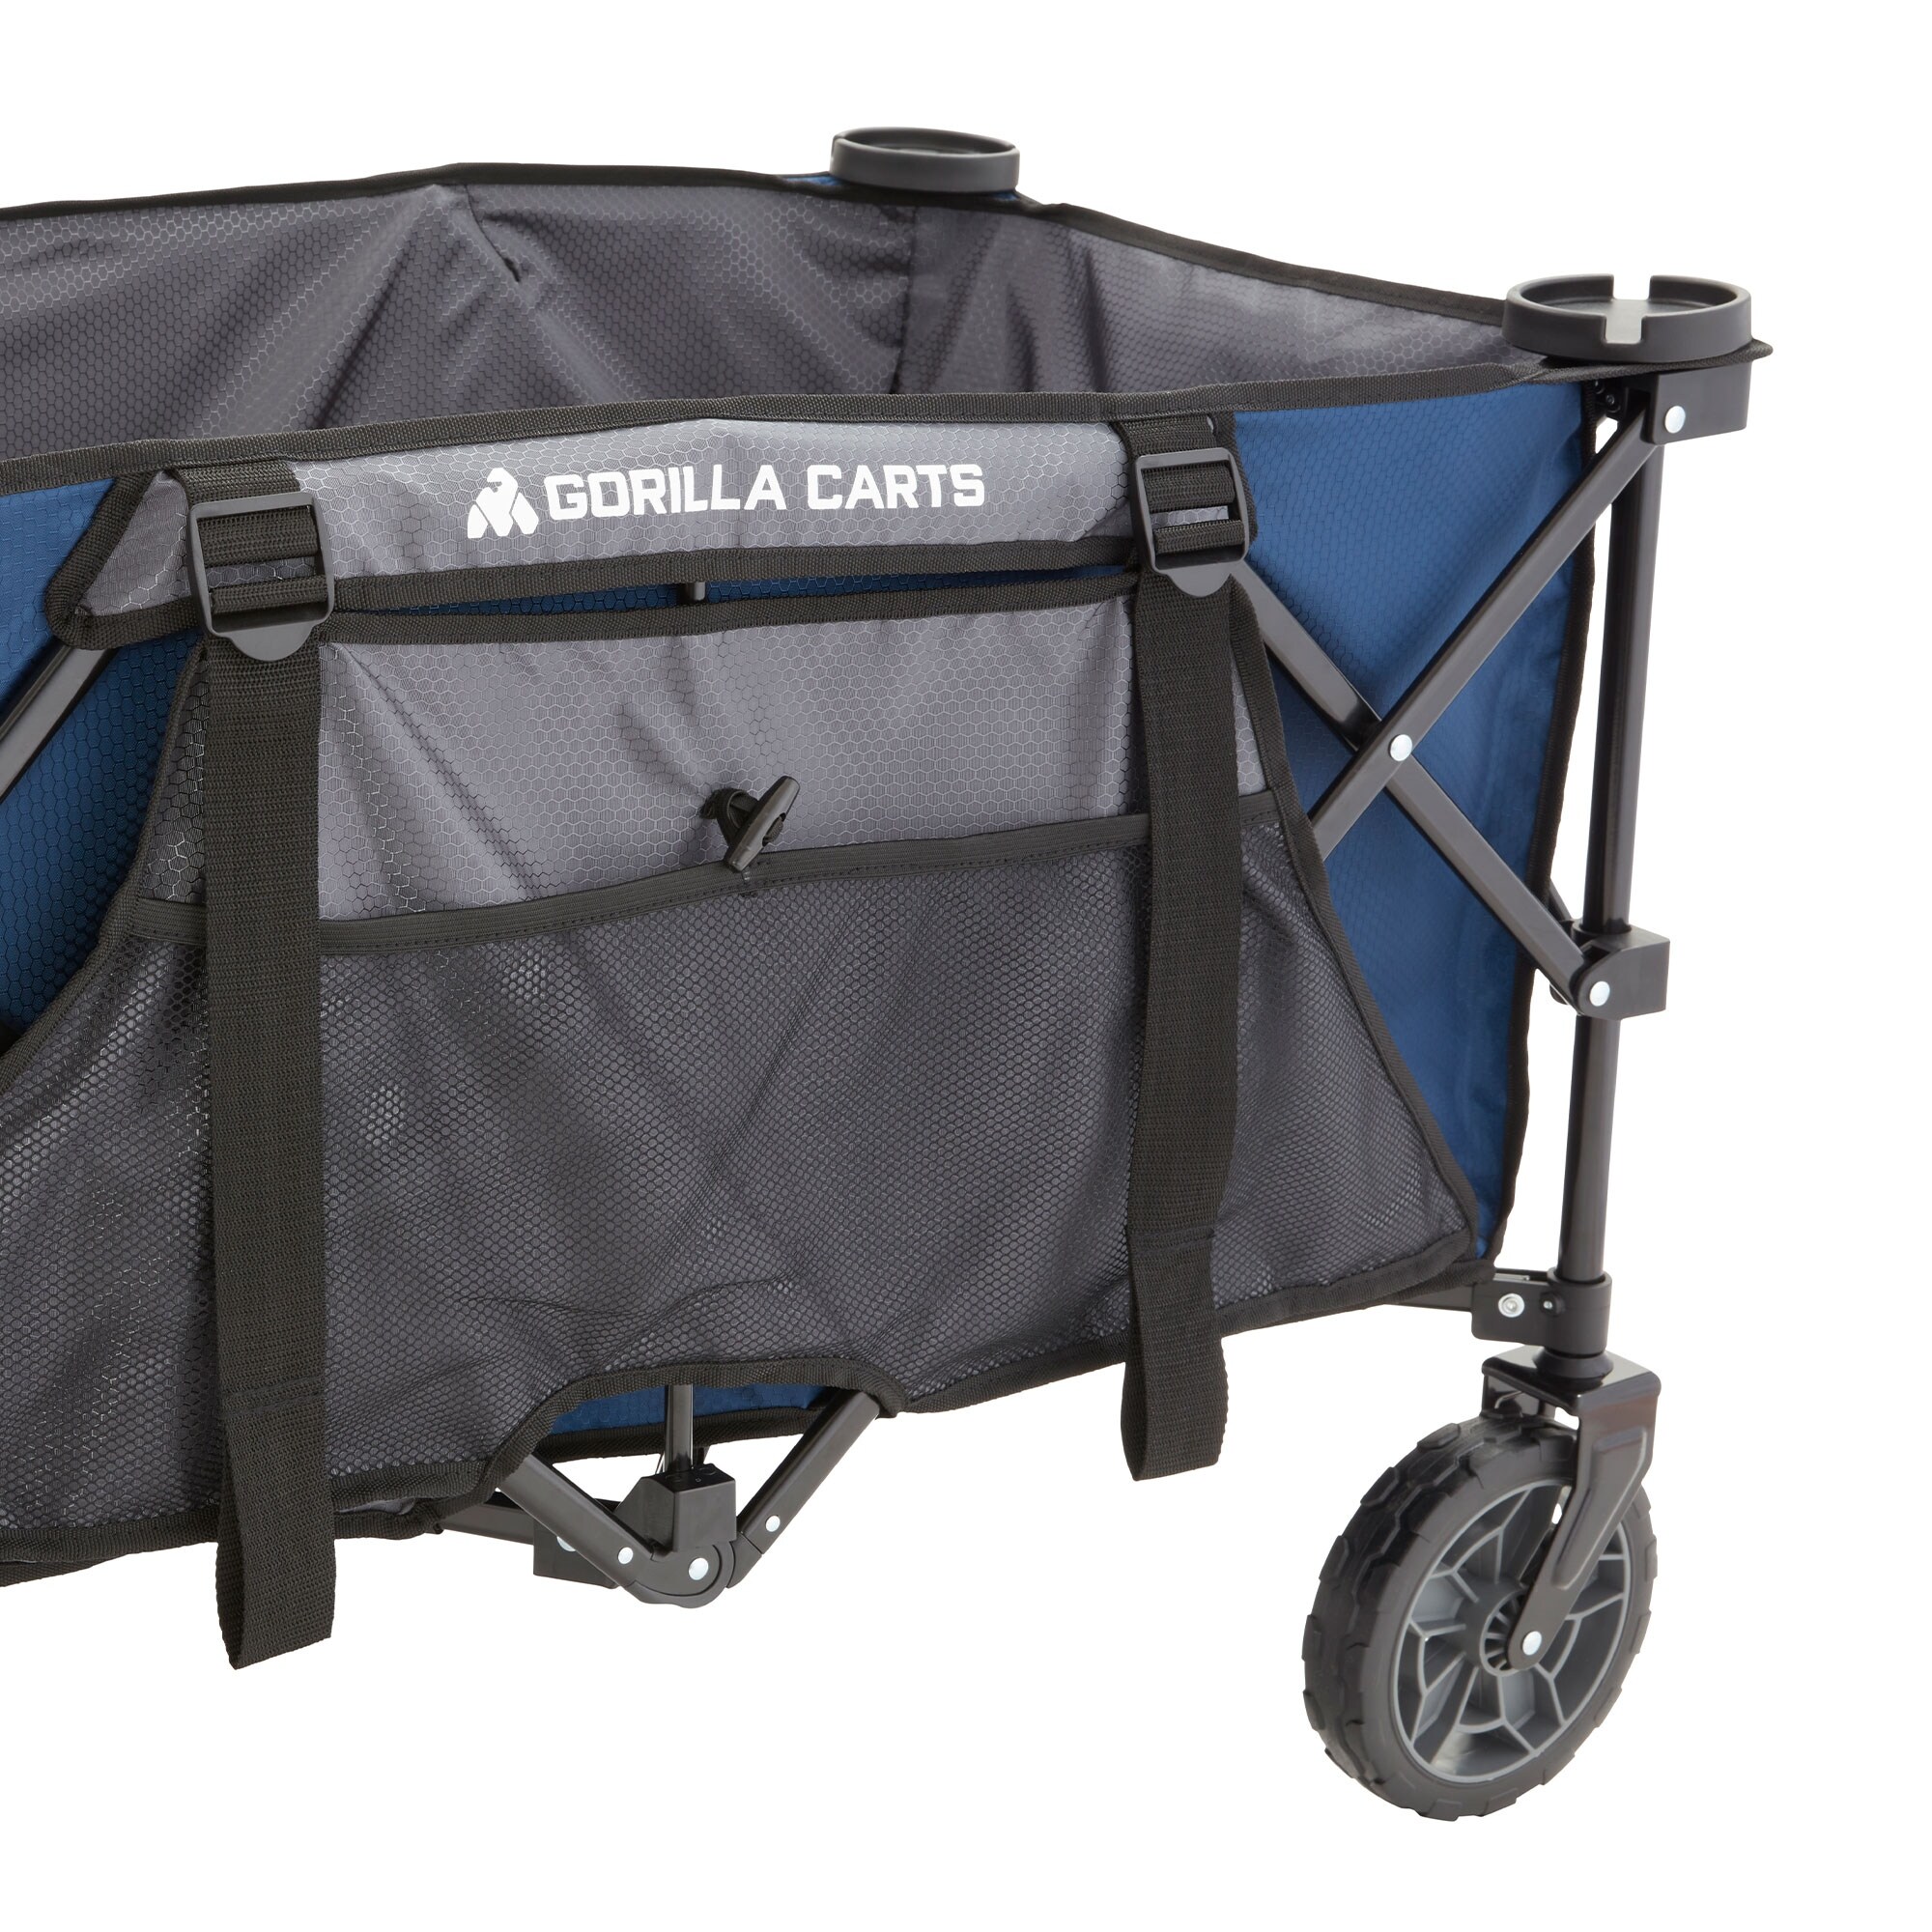 https://ak1.ostkcdn.com/images/products/is/images/direct/7ac016b6ab635cab95a12fb129e8036c40d51958/Gorilla-Carts-7-Cubic-Feet-Foldable-Utility-Beach-Wagon-w--Oversized-Bed%2C-Blue.jpg